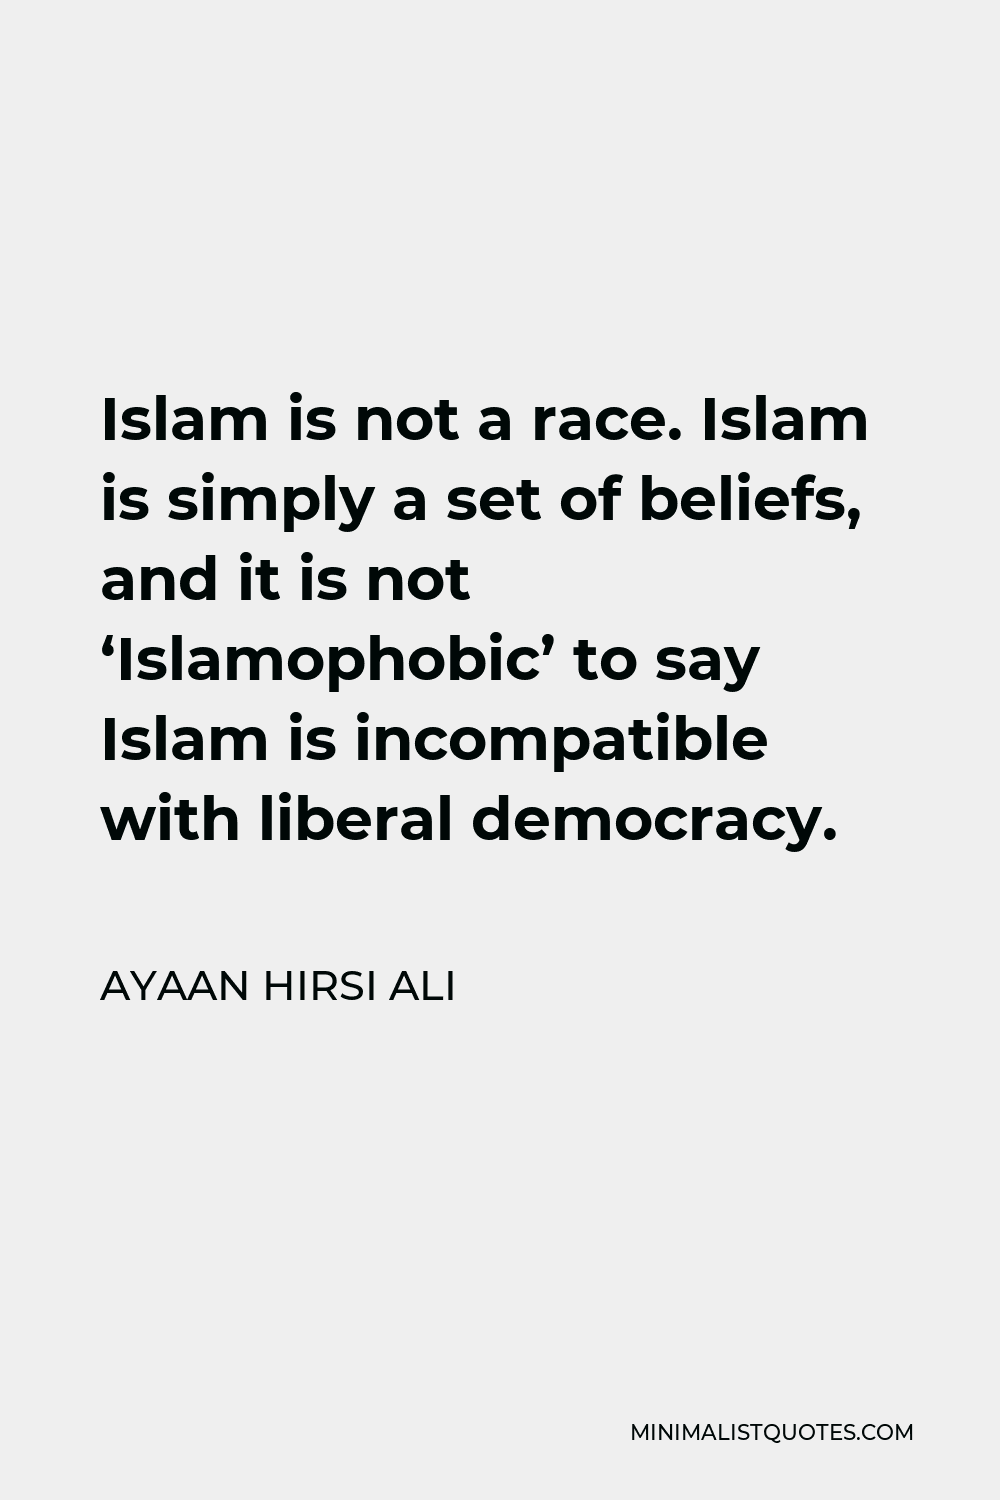 Ayaan Hirsi Ali Quote - Islam is not a race. Islam is simply a set of beliefs, and it is not ‘Islamophobic’ to say Islam is incompatible with liberal democracy.